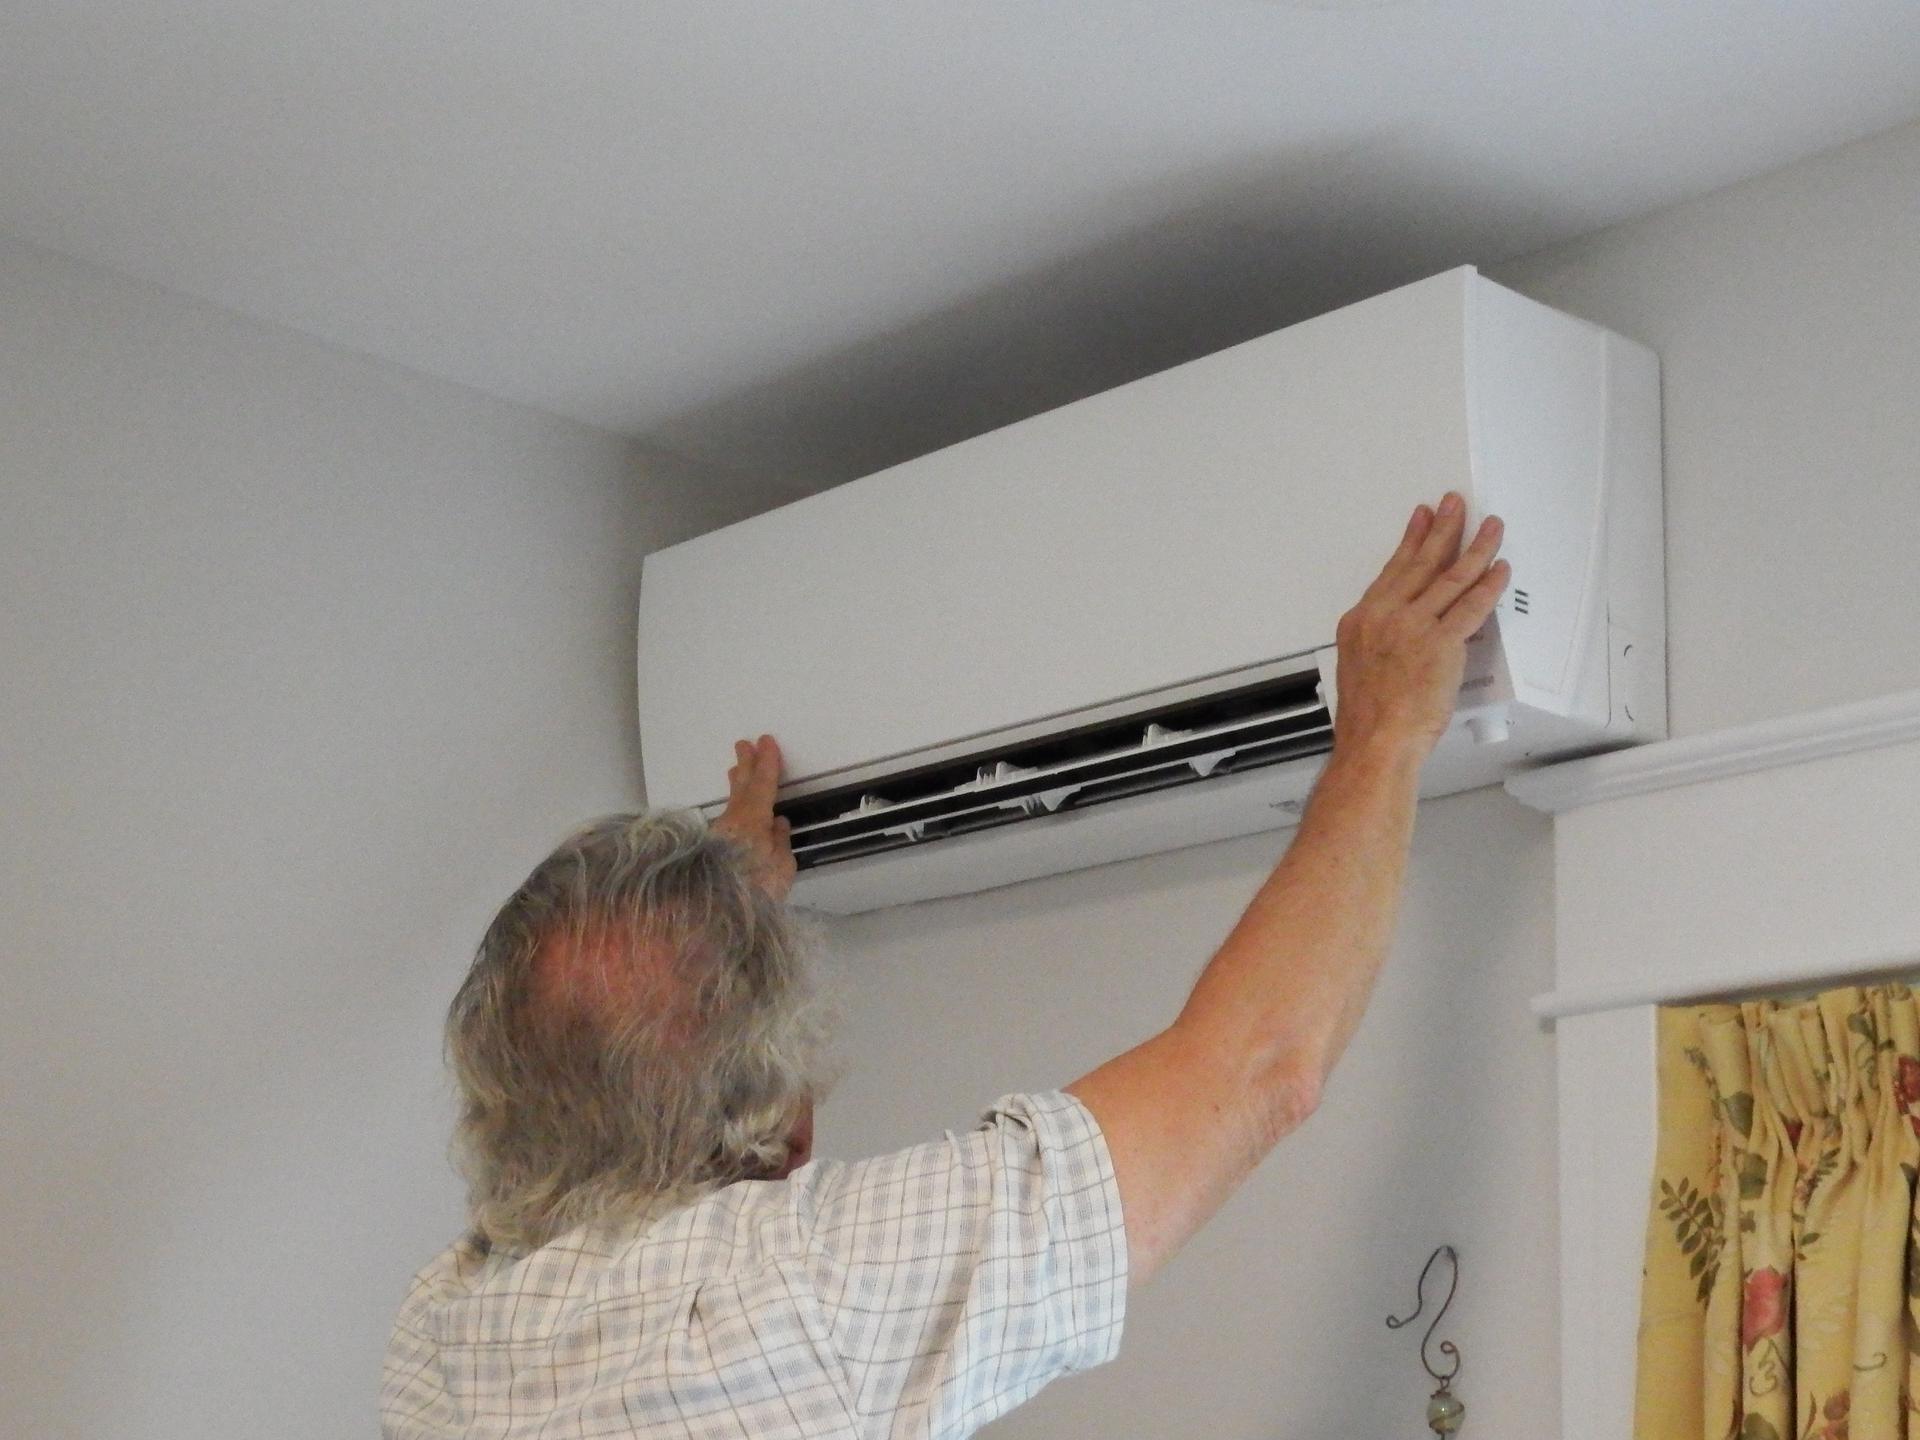 Upgrading from conventional hvac to an all-climate heat pump